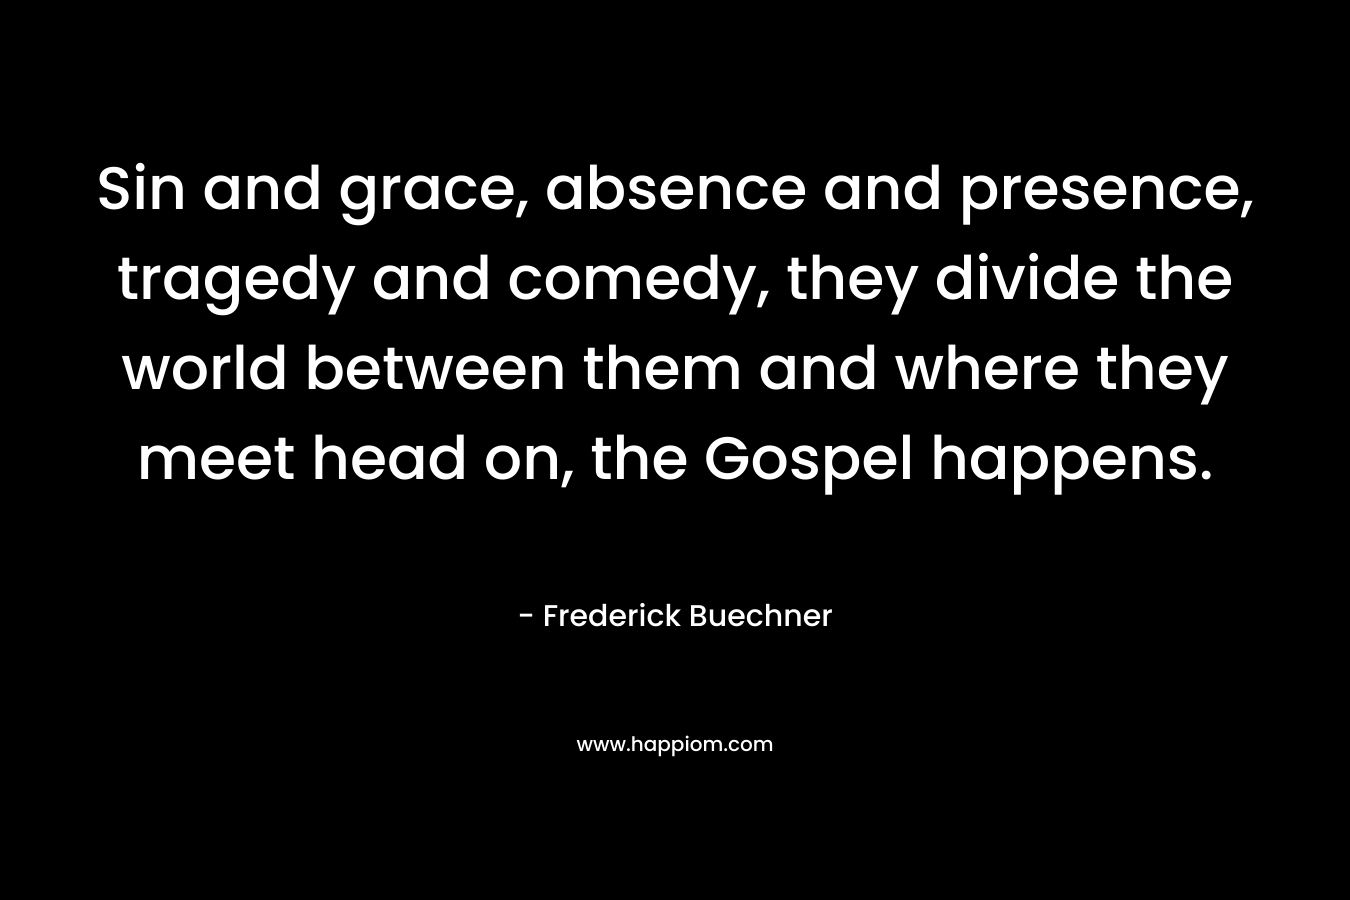 Sin and grace, absence and presence, tragedy and comedy, they divide the world between them and where they meet head on, the Gospel happens.